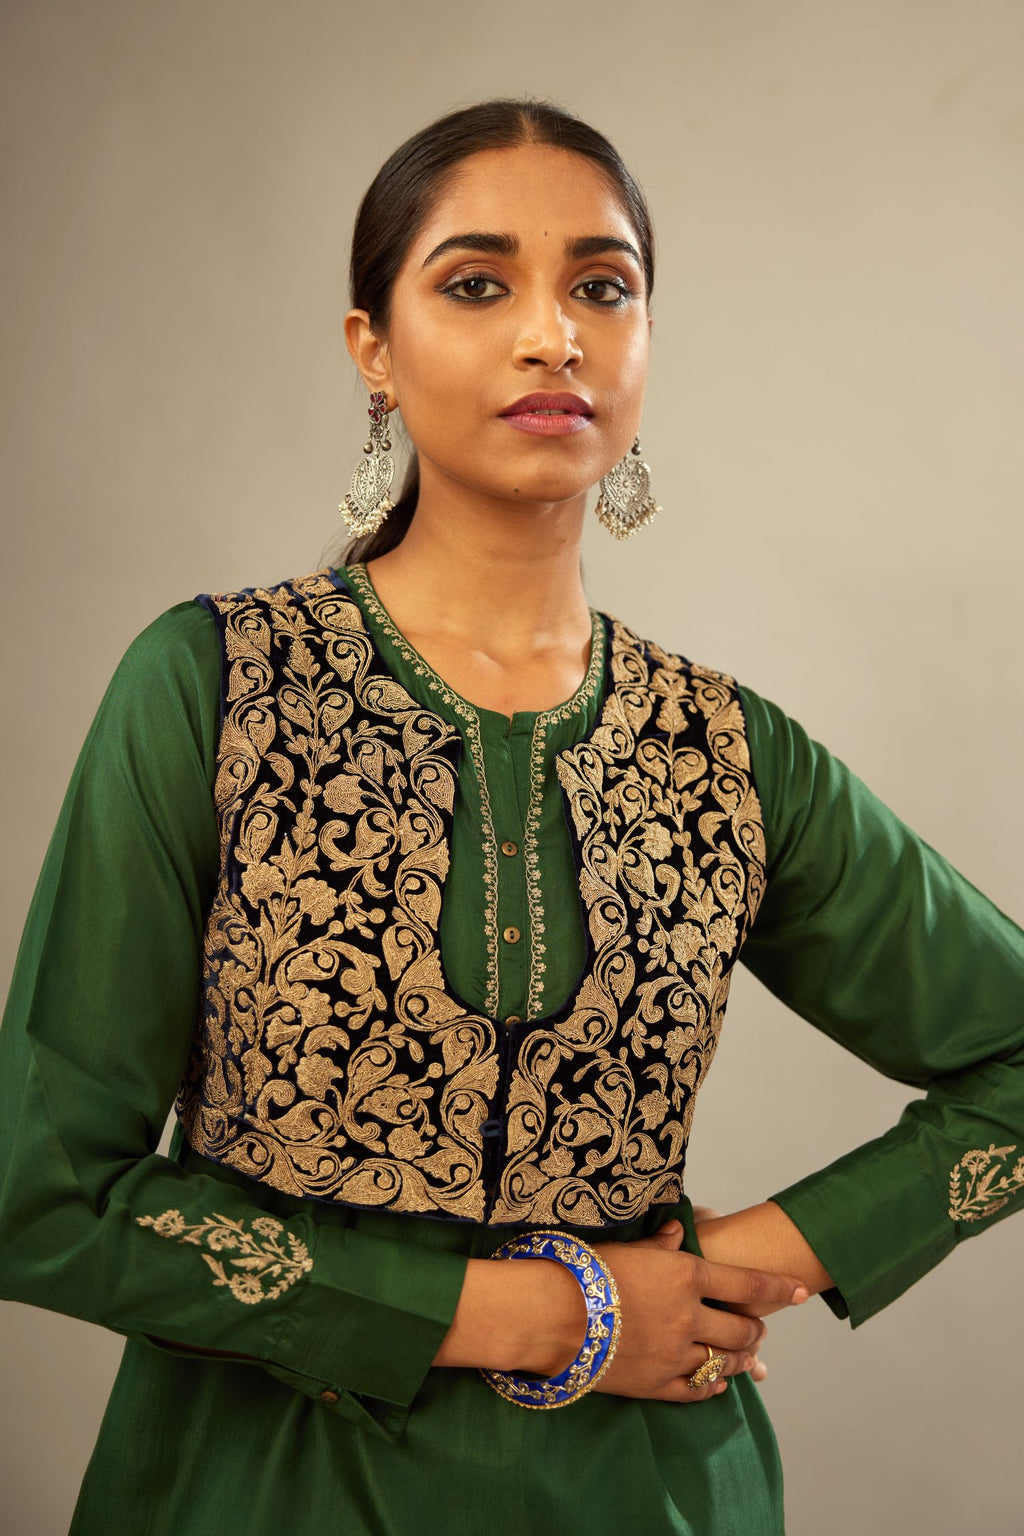 Green silk short kurta set with high-low hem with rounded edges, highlighted with gold zari embroidery.